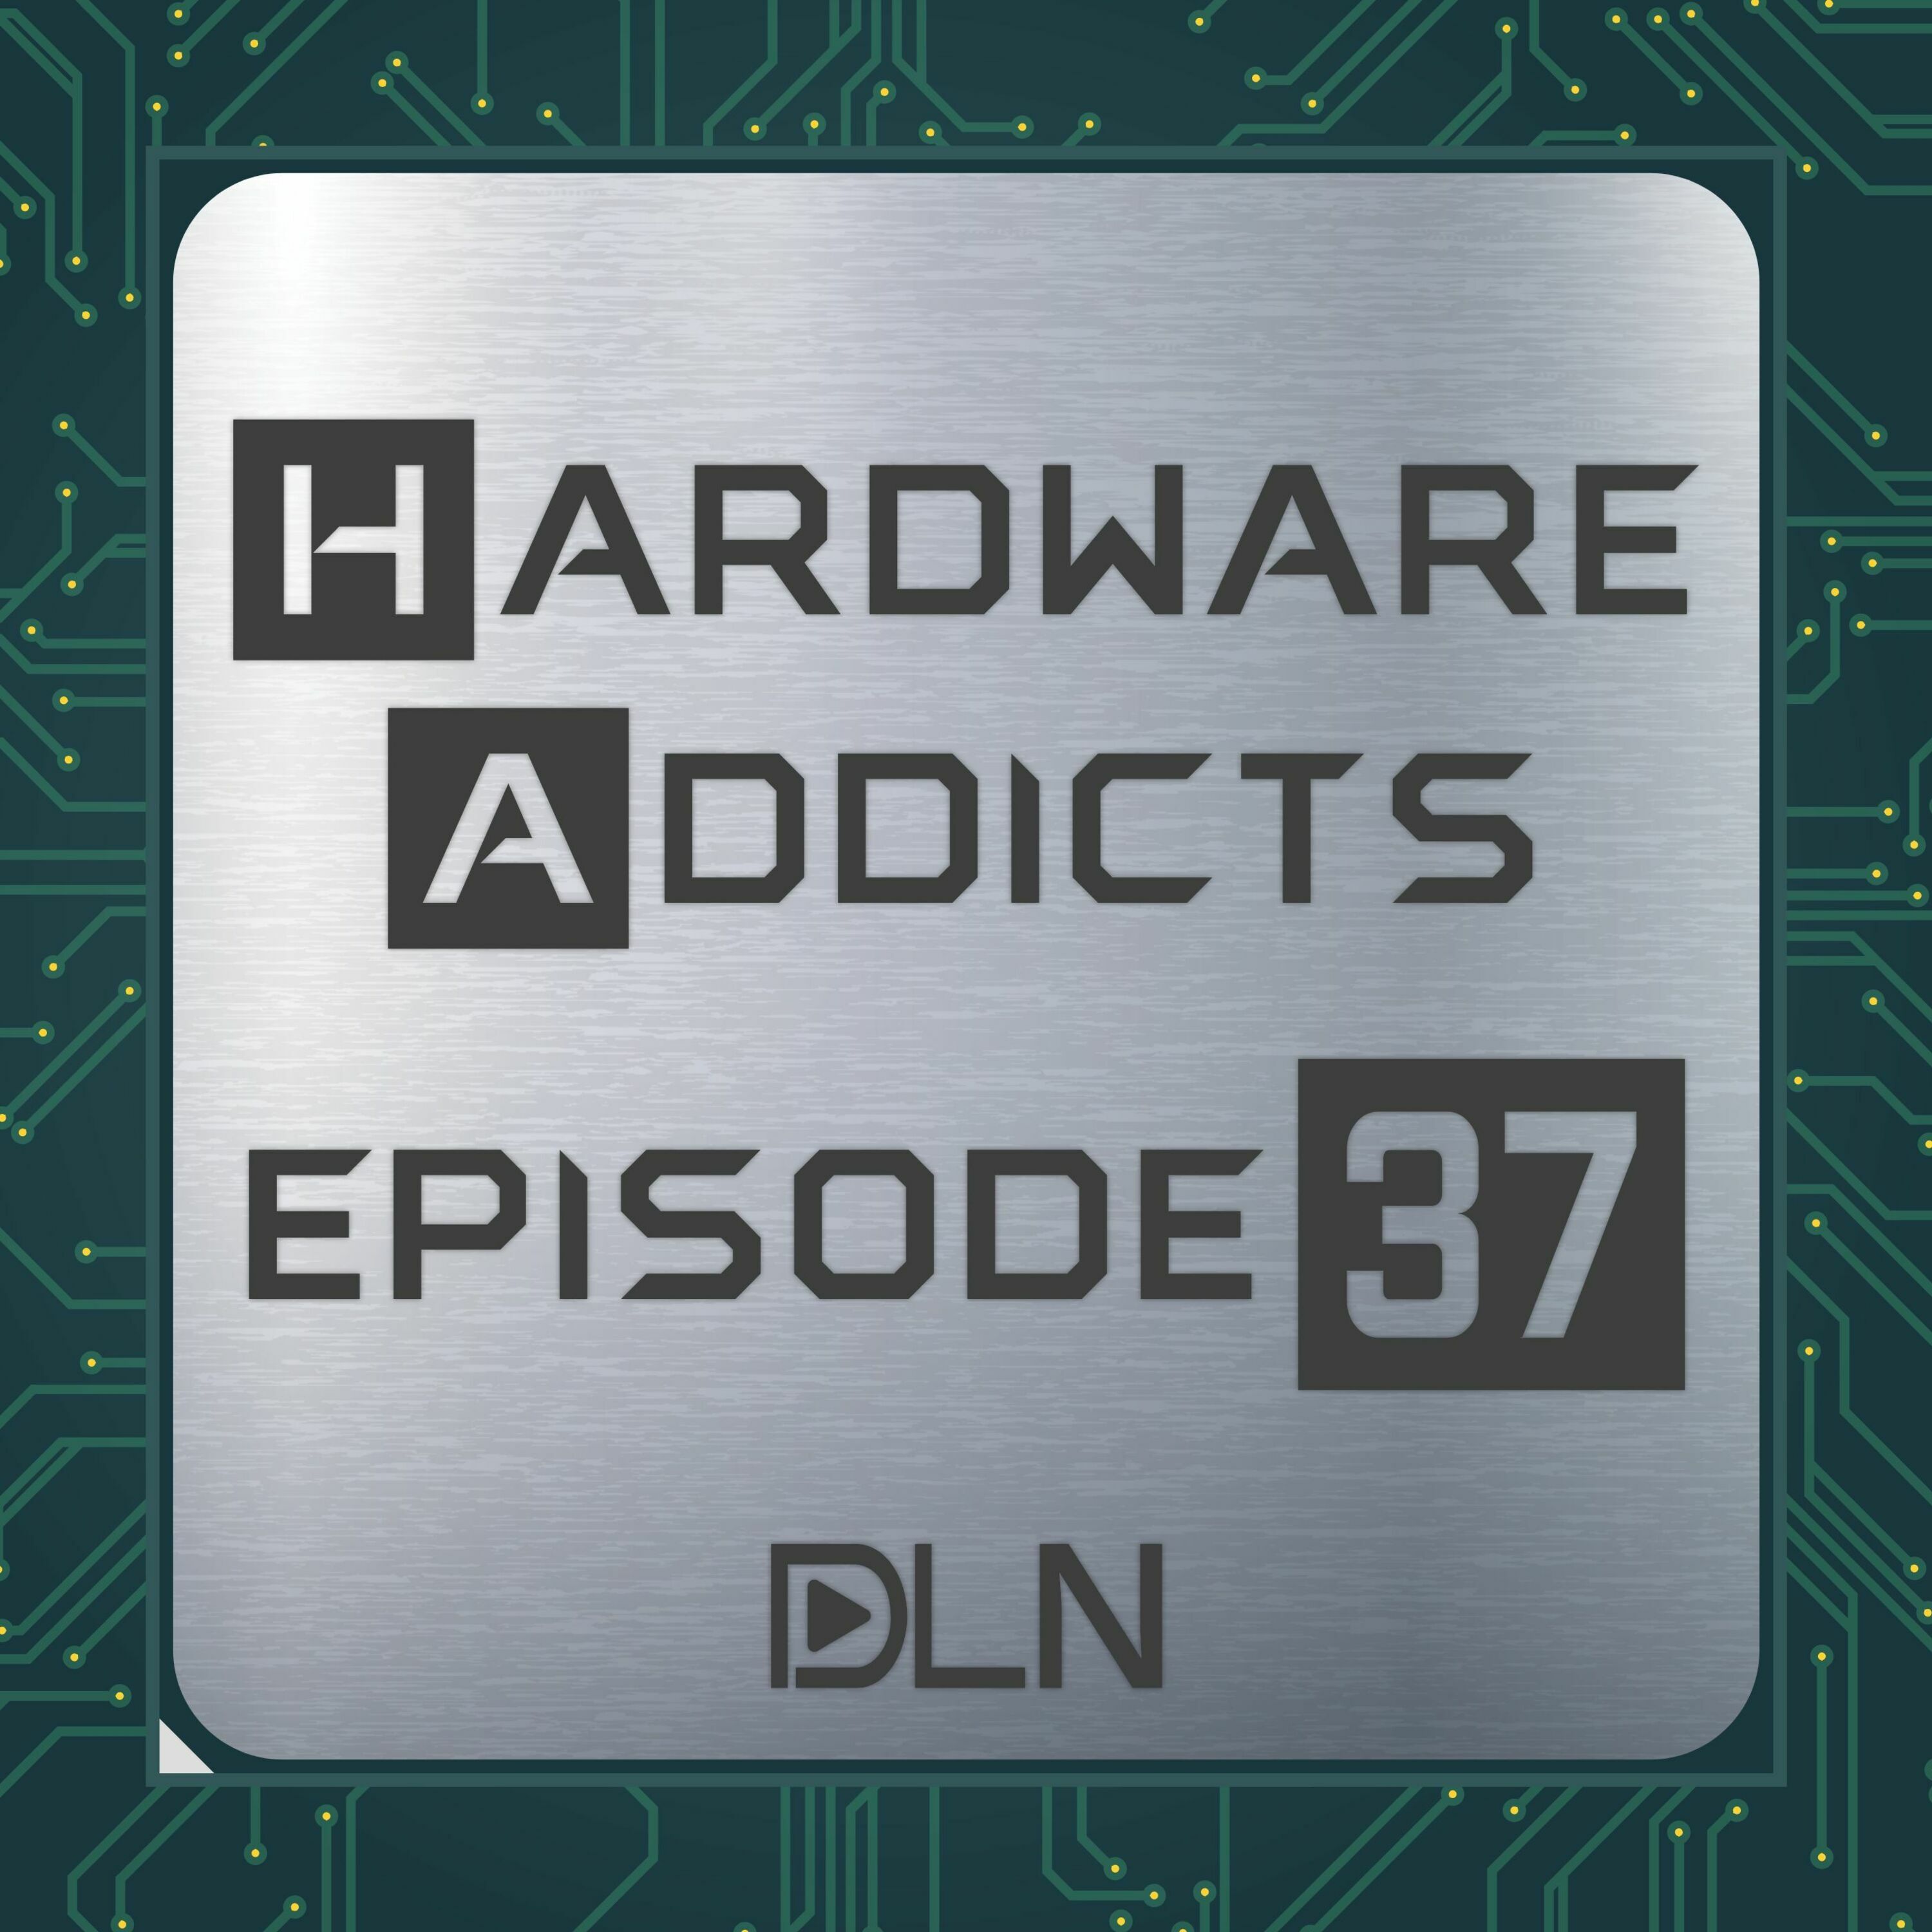 37: Full Gaming PCs In The Palm Of Your Hand? | Hardware Addicts